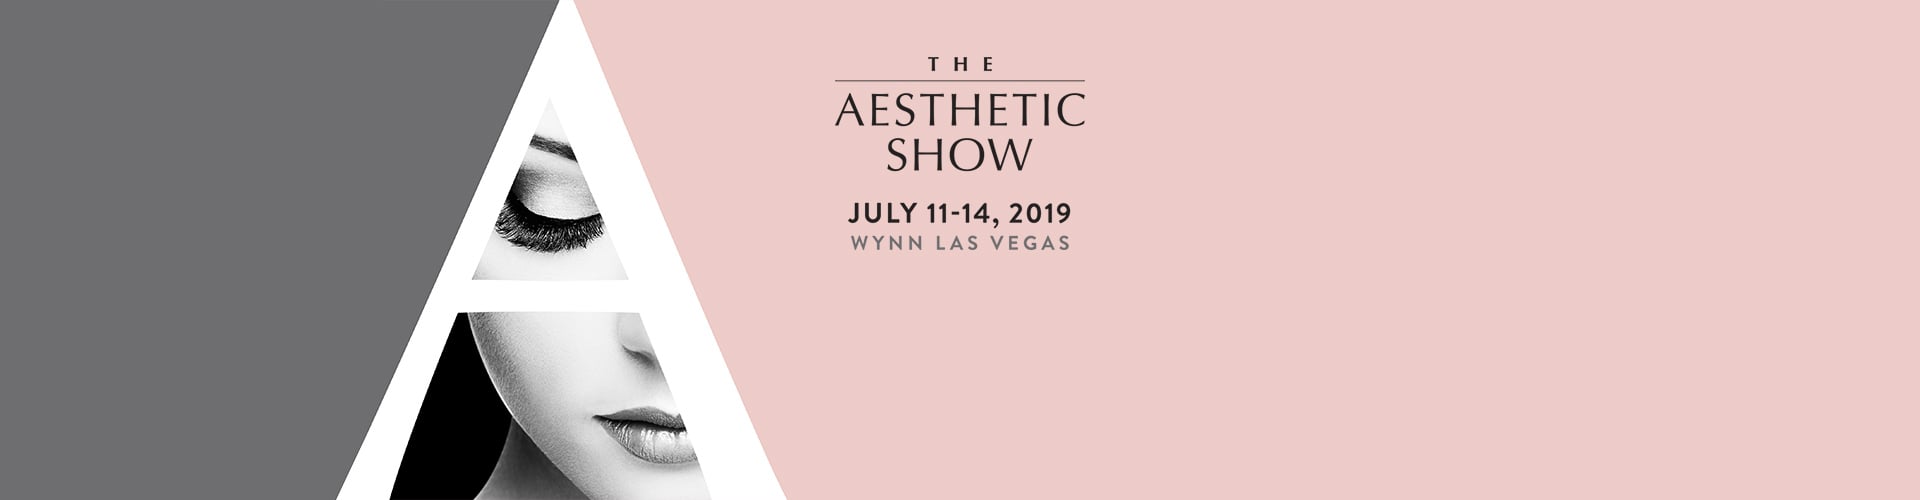 The Aesthetic Show